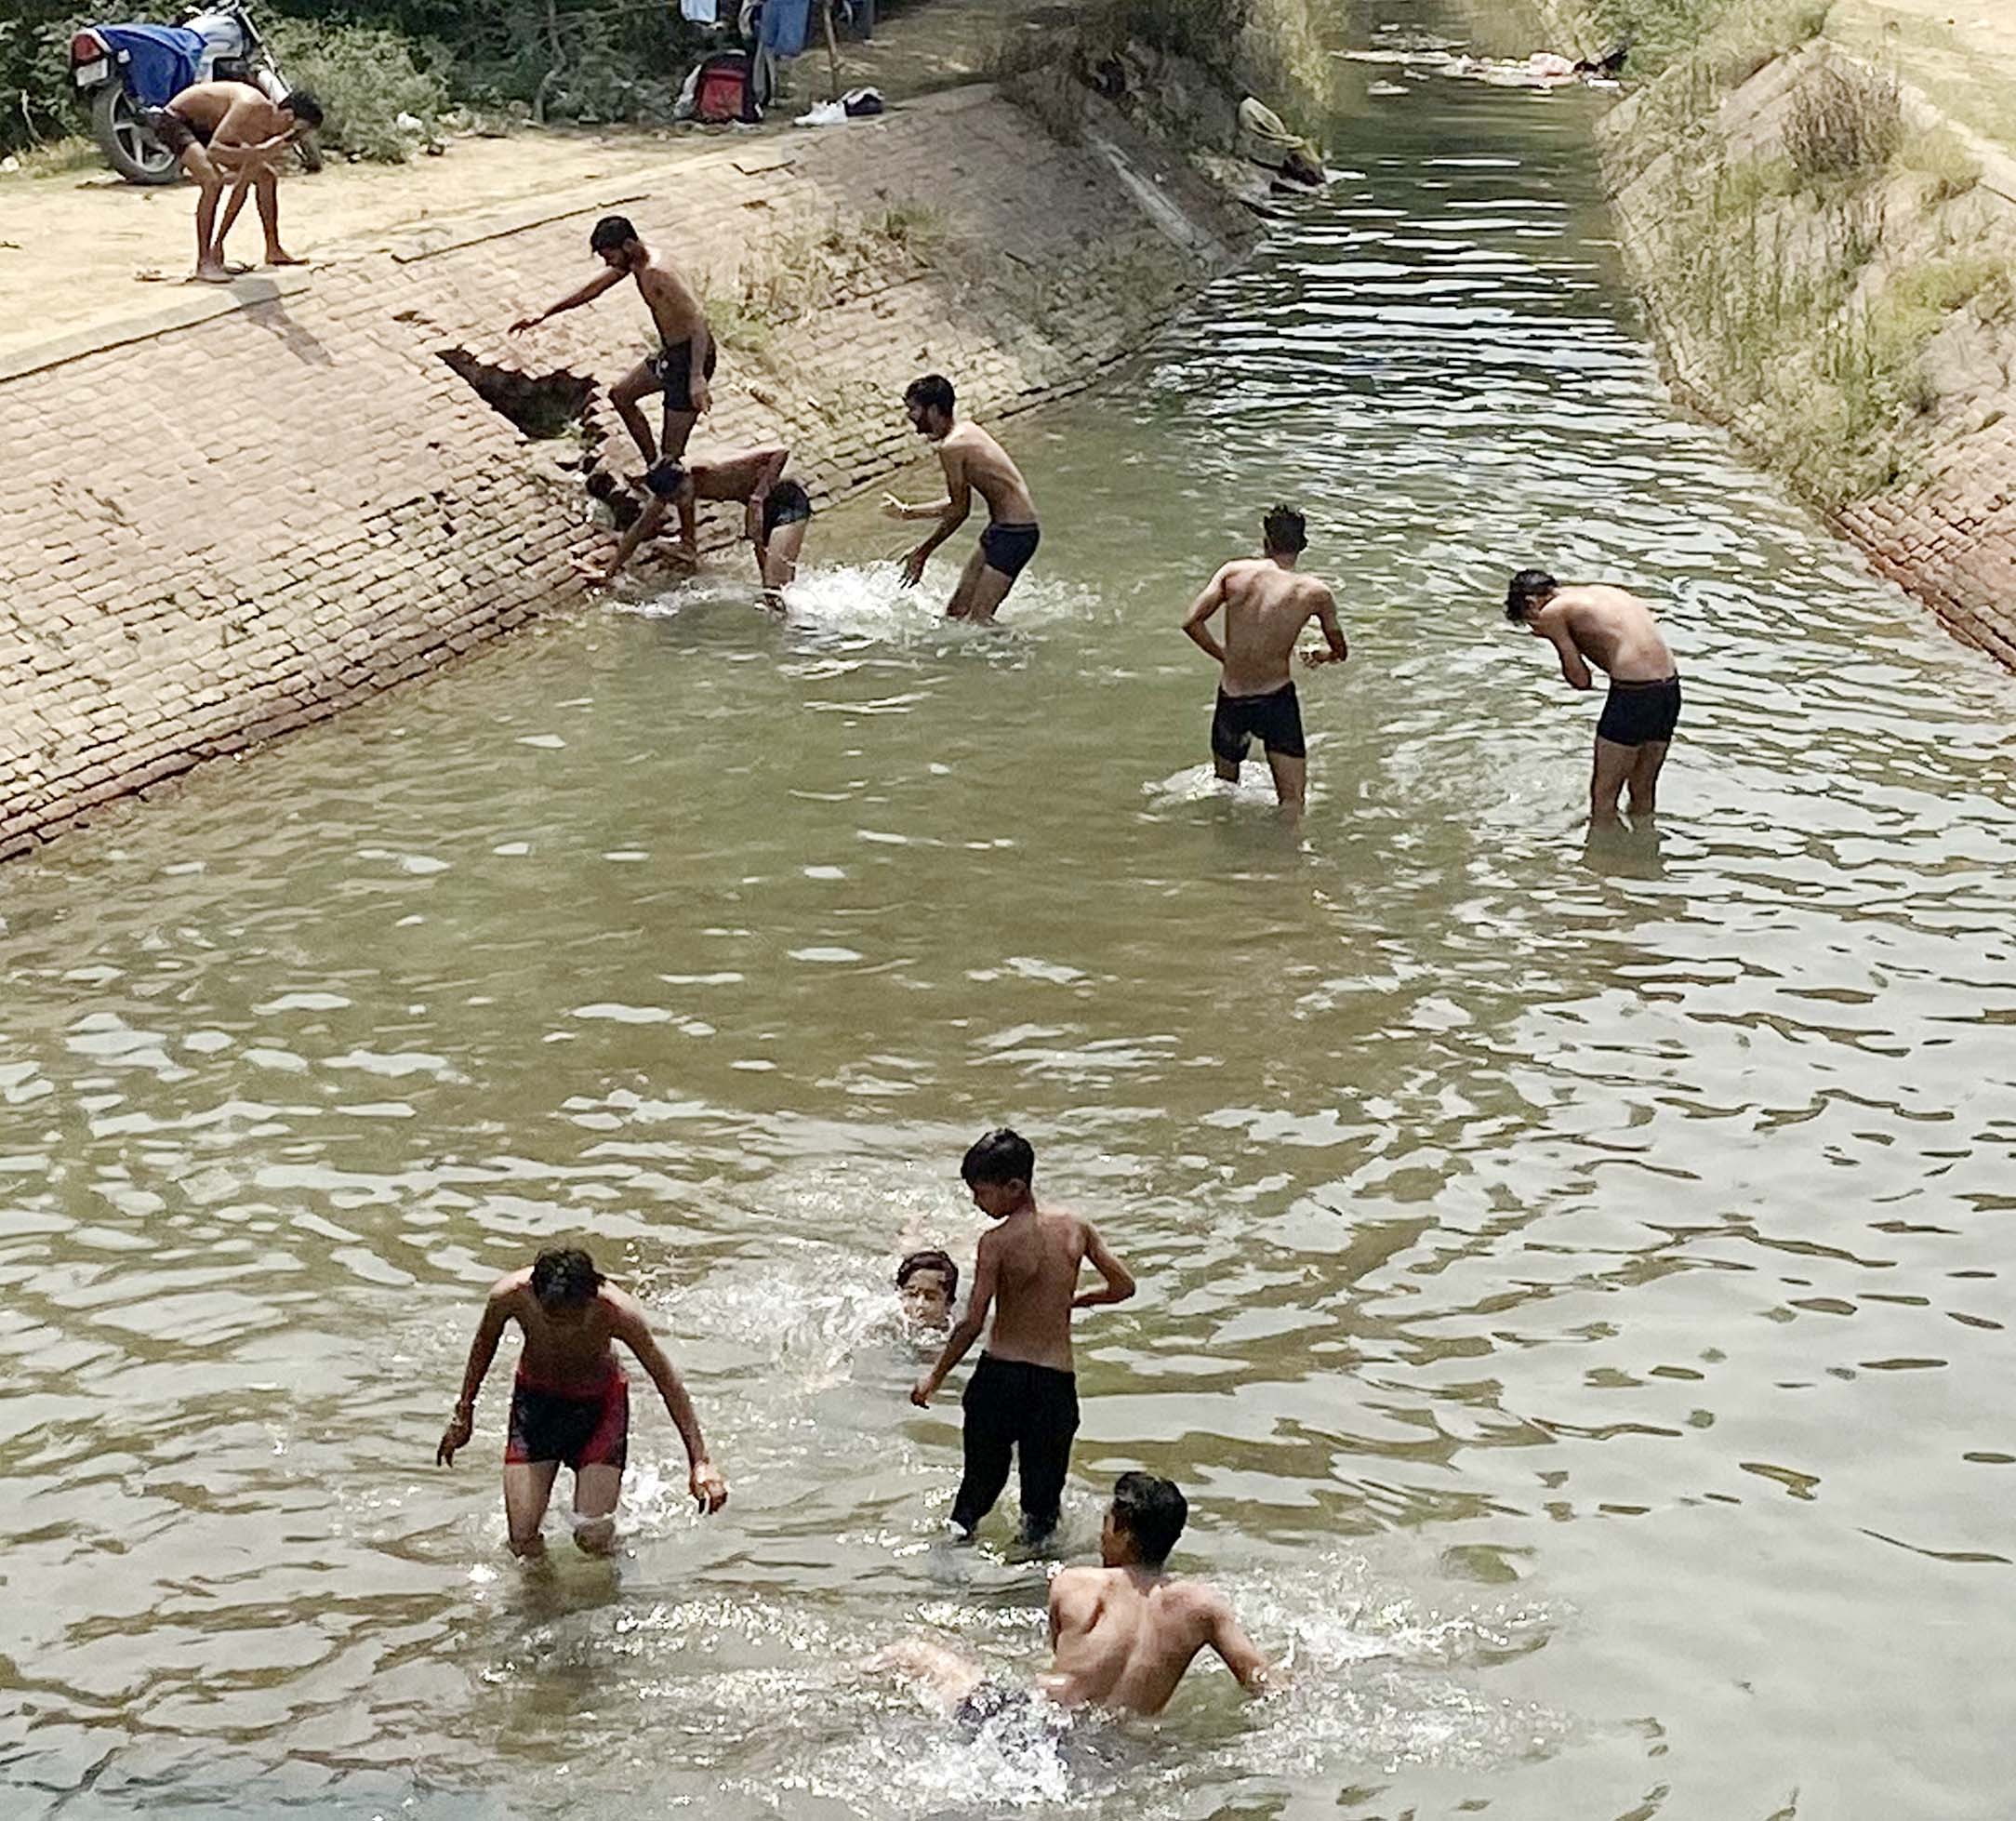 Patiala youths don't care two hoots for ban, swim in Bhakra Canal